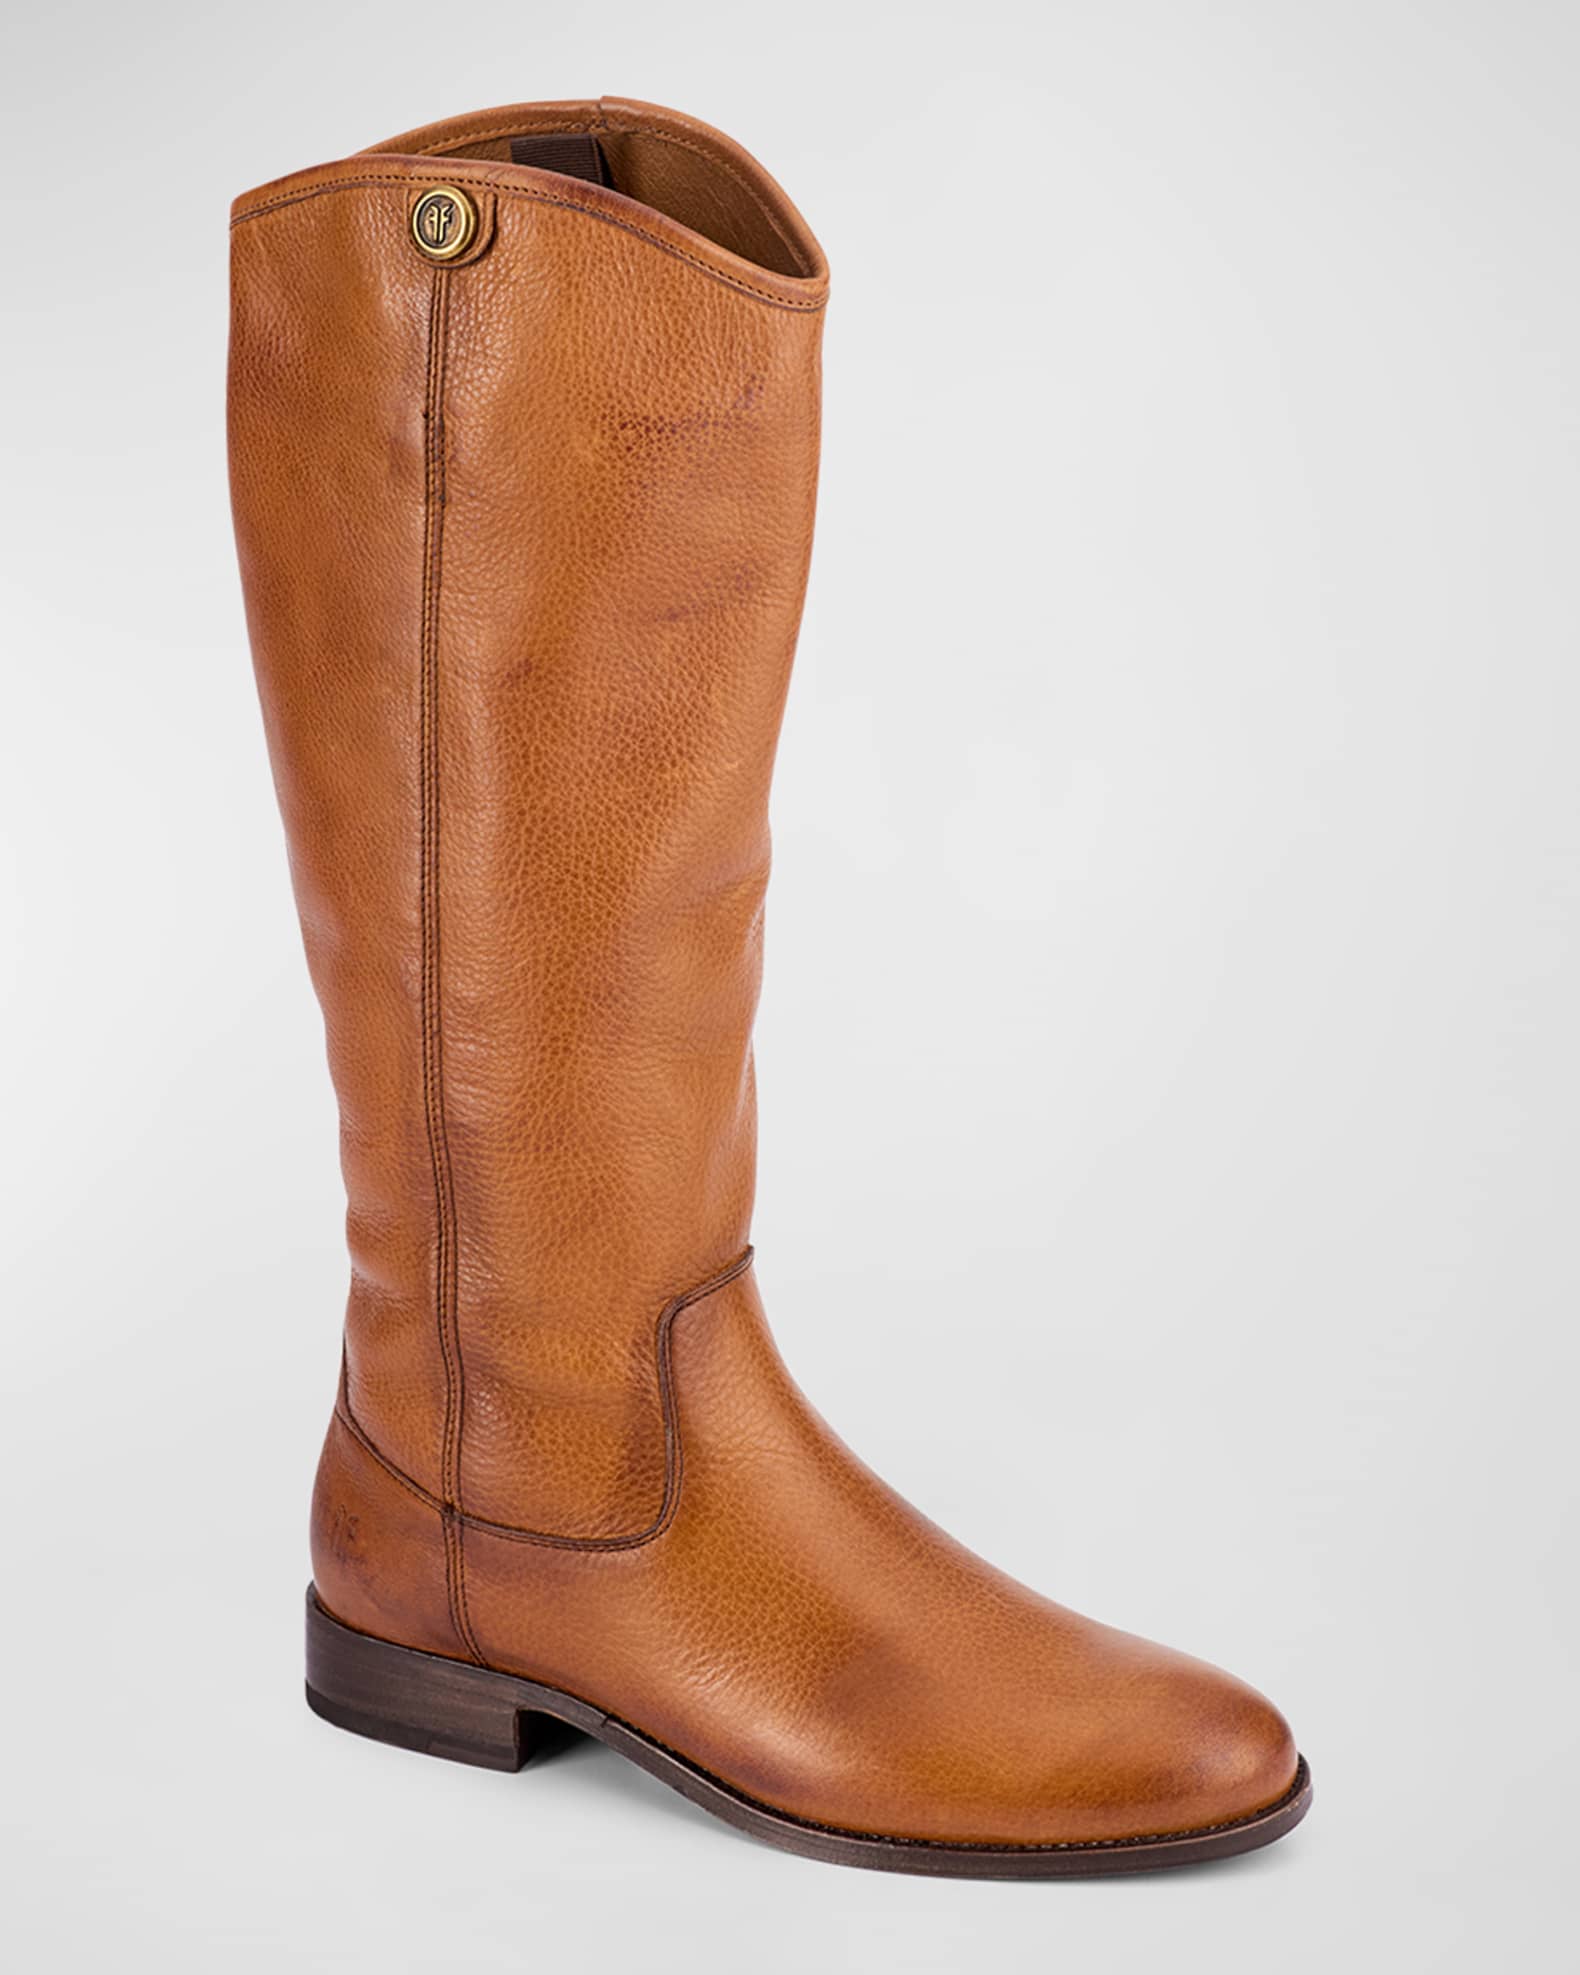 Frye Melissa Button Leather Tall Riding Boots | Neiman Marcus